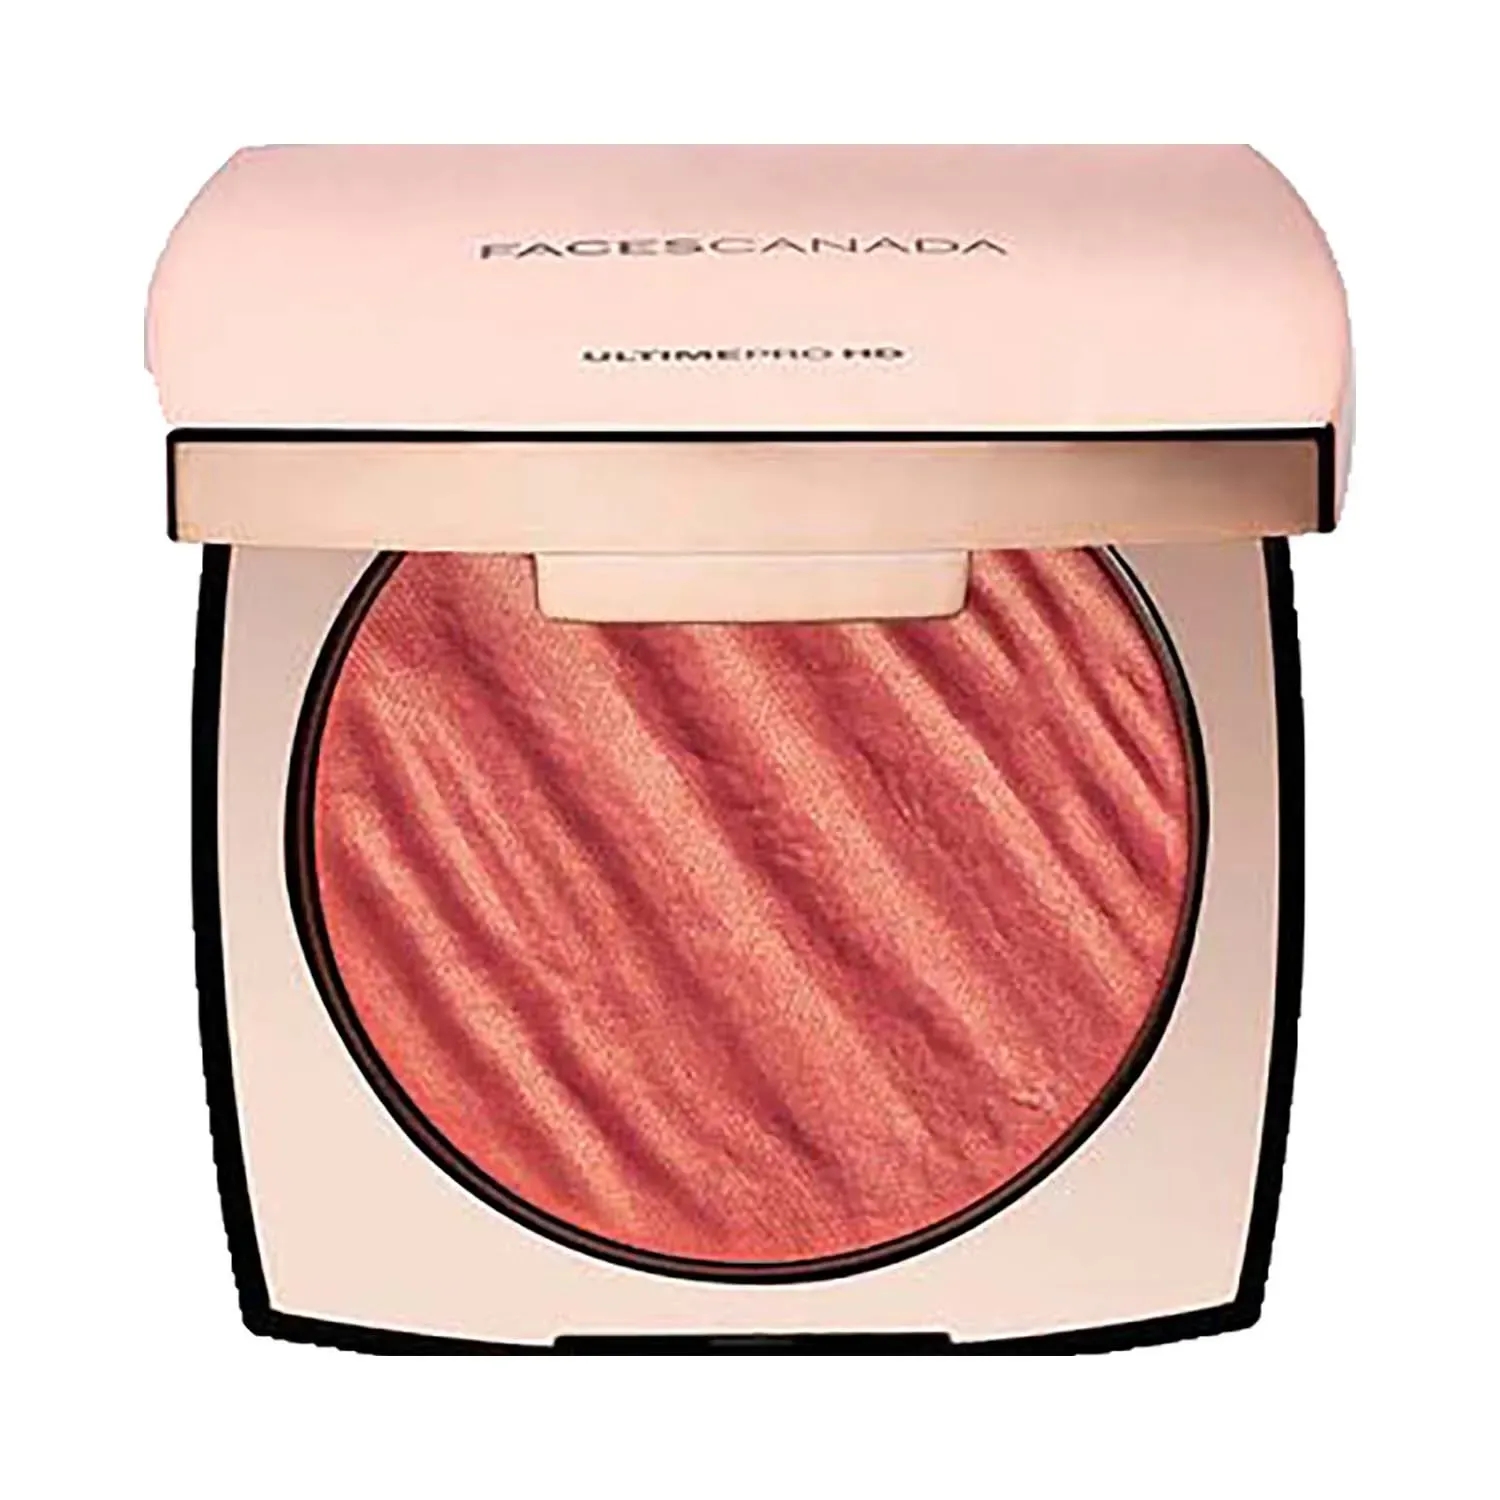 Faces Canada | Faces Canada Ultime Pro HD Lights Camera Blush - 01 Blossom (6.5g)